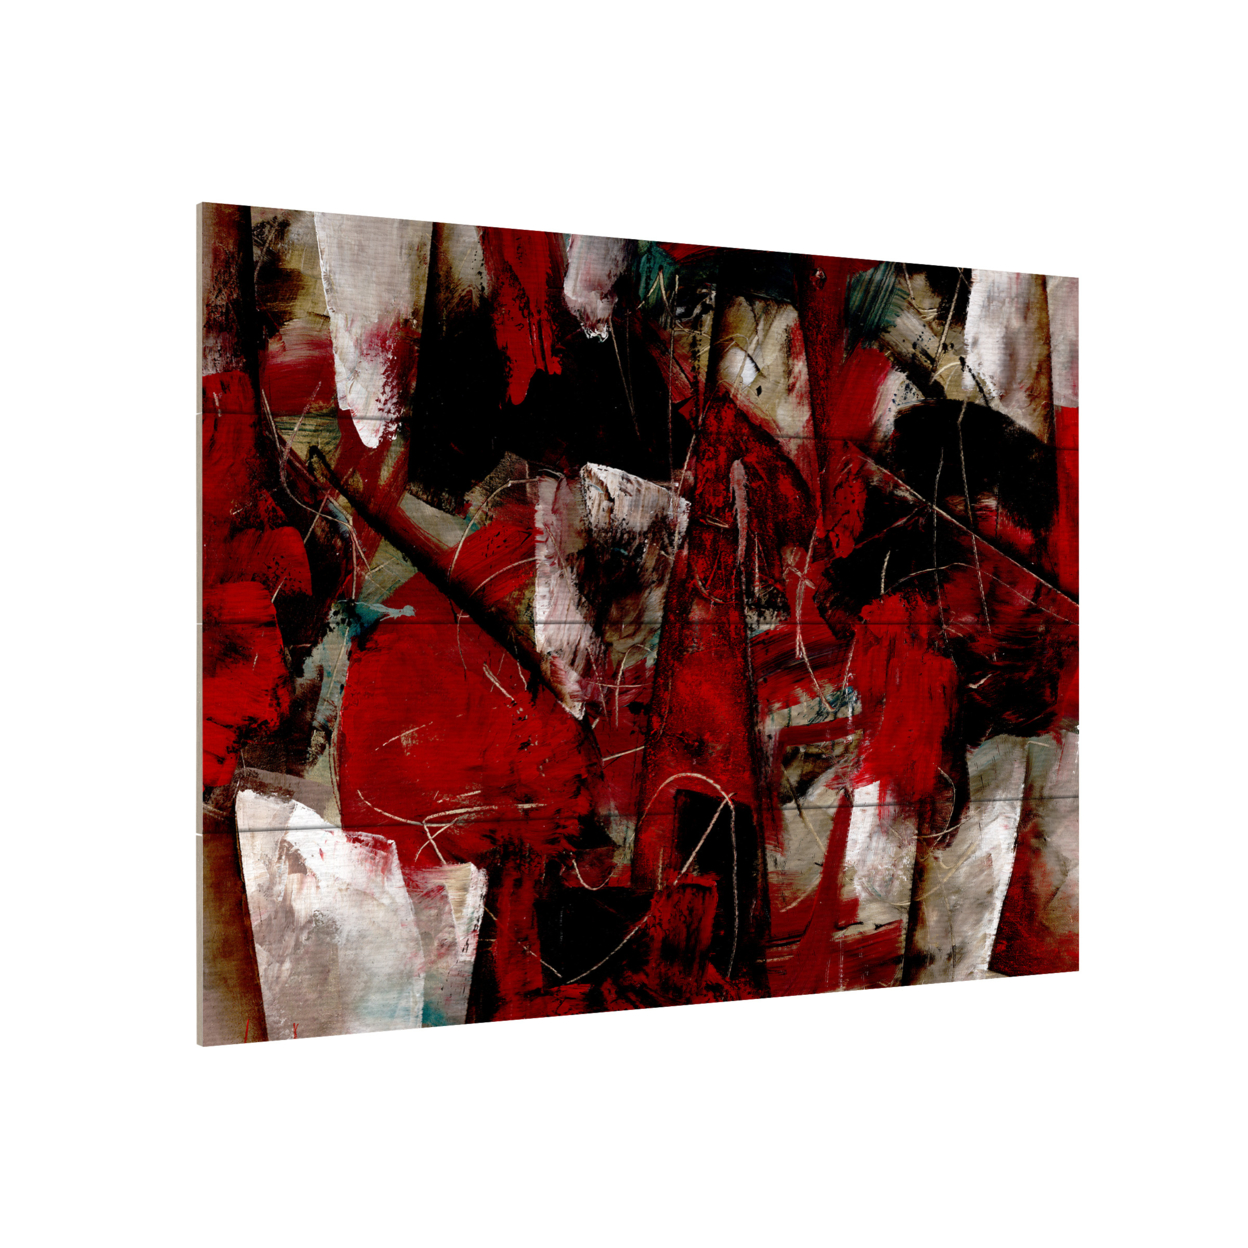 Wall Art 12 X 16 Inches Titled Abstract IV Ready To Hang Printed On Wooden Planks